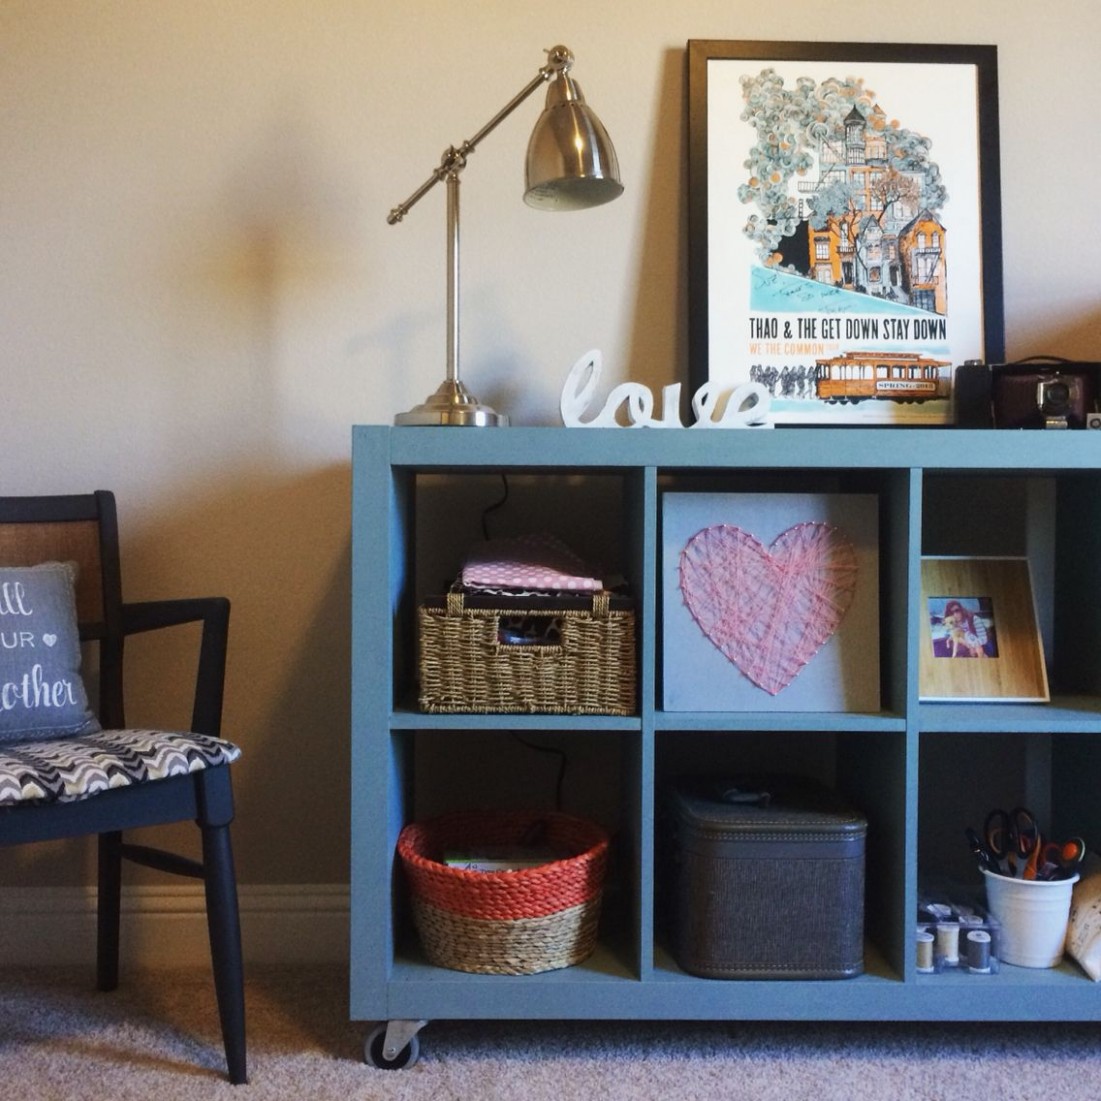 Expedit Ikea Bookshelf Painted Duck Egg Blue With Annie Sloan ..